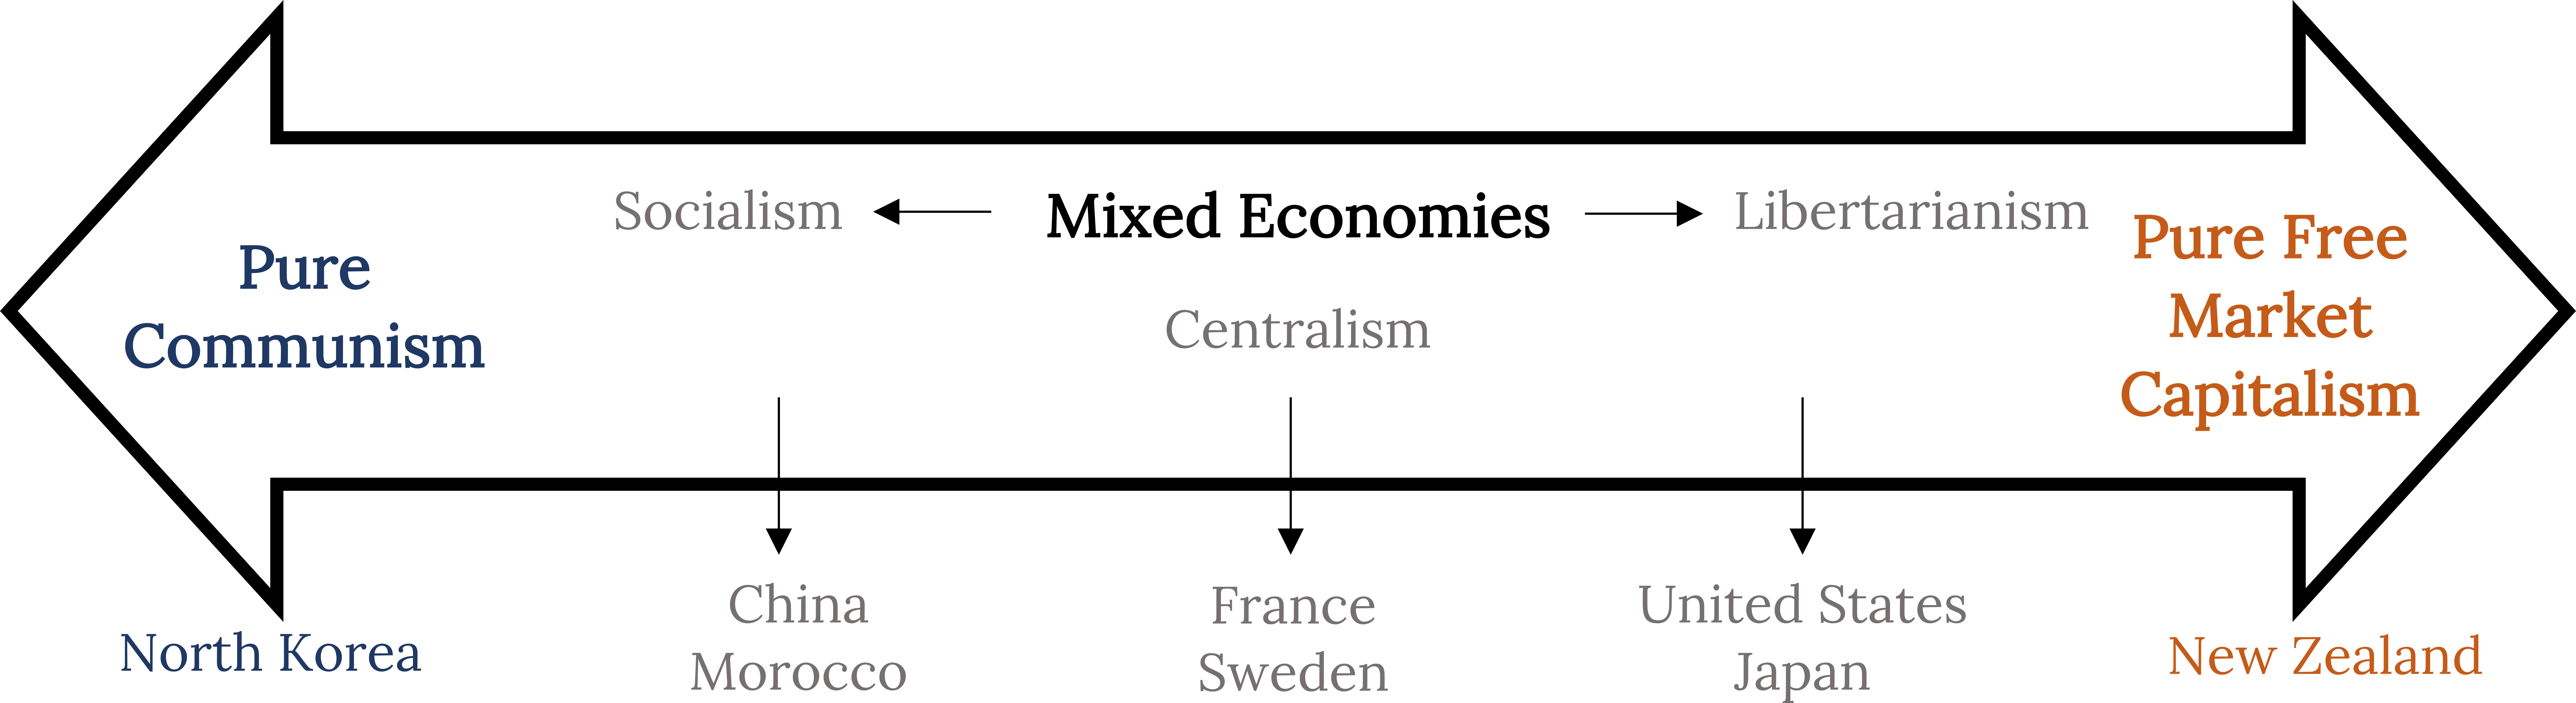 An open, double ended arrow showing the economic spectrum. The left side is labeled “Pure Communism” and the right side is labeled “Pure Free Market Capitalism.” Inside the middle of the arrow is a heading labeled “Mixed Economies” with a left heading of “Socialism,” a right heading of “Libertarianism”, and a middle heading of "Centralism." Underneath the arrow are example countries, with lines from the names toward the larger arrow to indicate where they lie on the spectrum. From left (Pure Communism) to right (Pure Free Market Capitalism) to countries read: North Korea, China and Morocco, France and Sweden, United States and Japan, New Zealand.